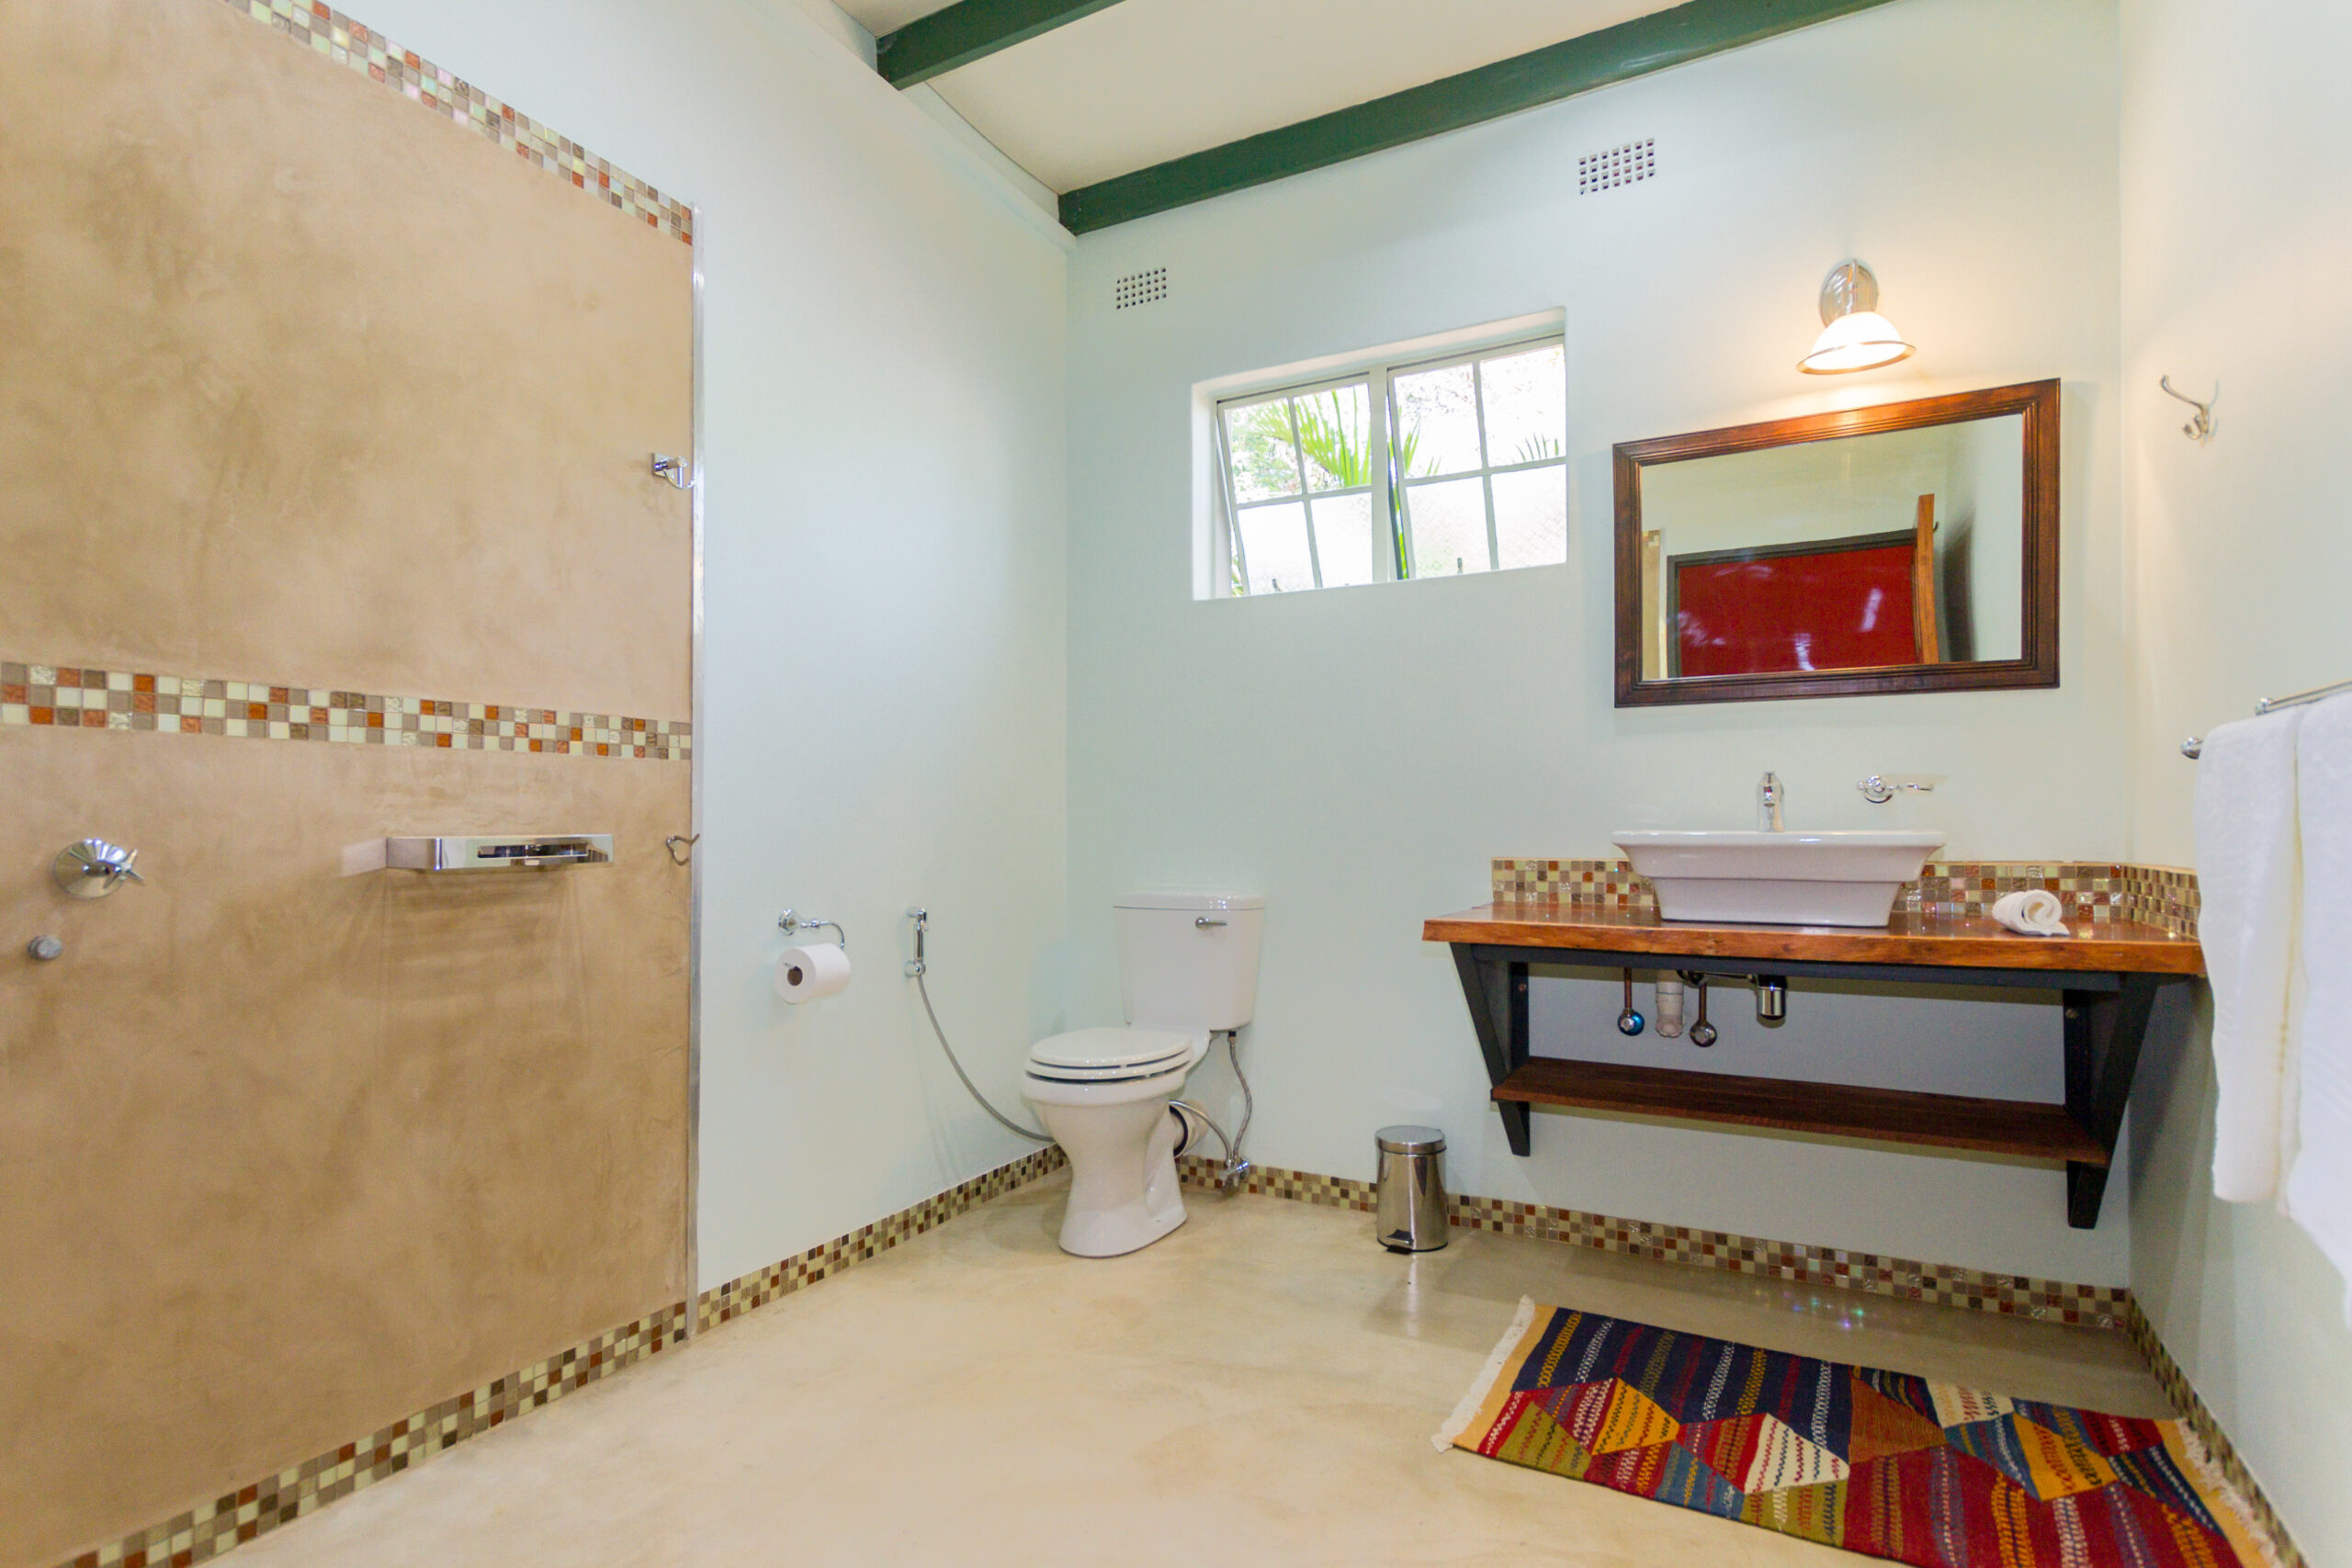 All rooms feature ensuite bathrooms at The Courtney Lodge